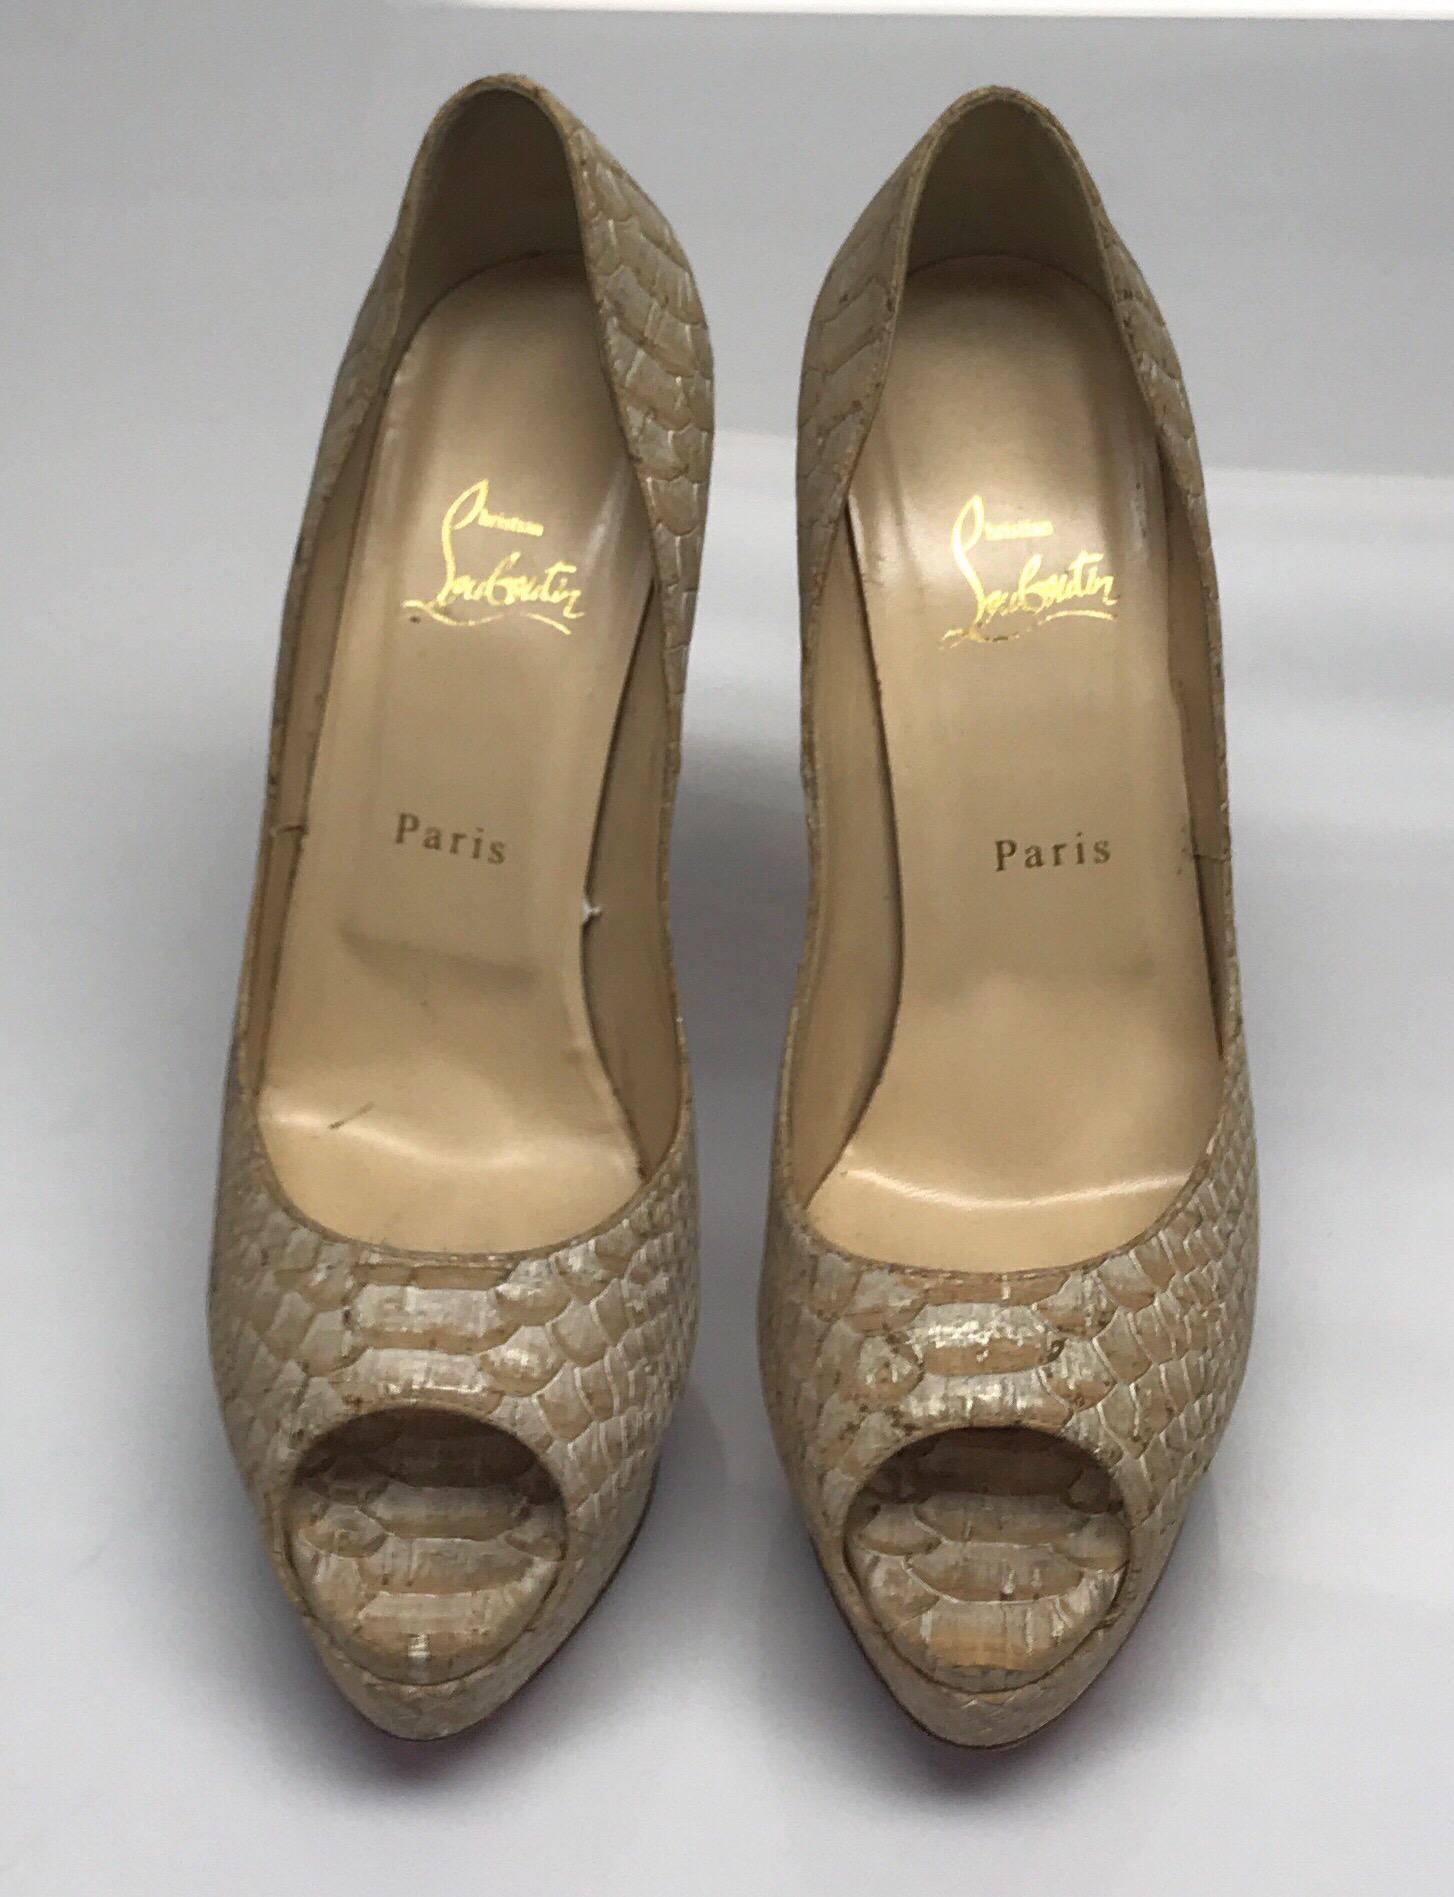 Christian Louboutin Tan & Metallic Snake Platform Peep toe Pumps - 41. These stunning Christian Louboutin pumps are in good condition, they show minor wear to the bottom of the shoe where some of the red has rubbed away. They are made of tan